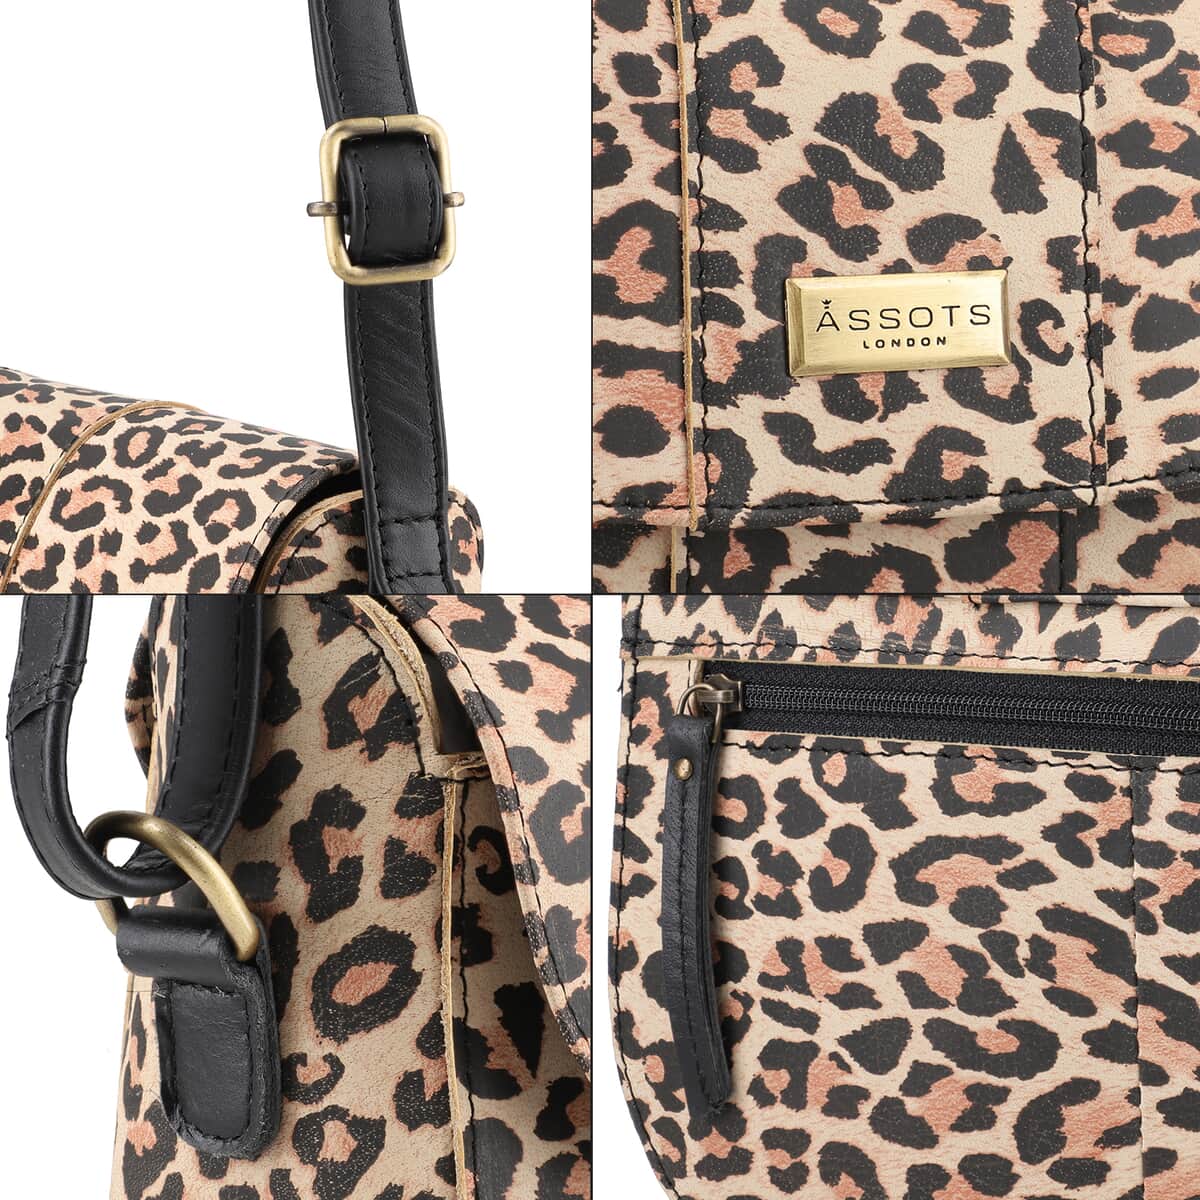 100% Genuine Leather Leopard Print Crossbody Sling Bag Size: 8.66(L)x8.07(H)x3.13(W) Inches Color: Brown image number 5